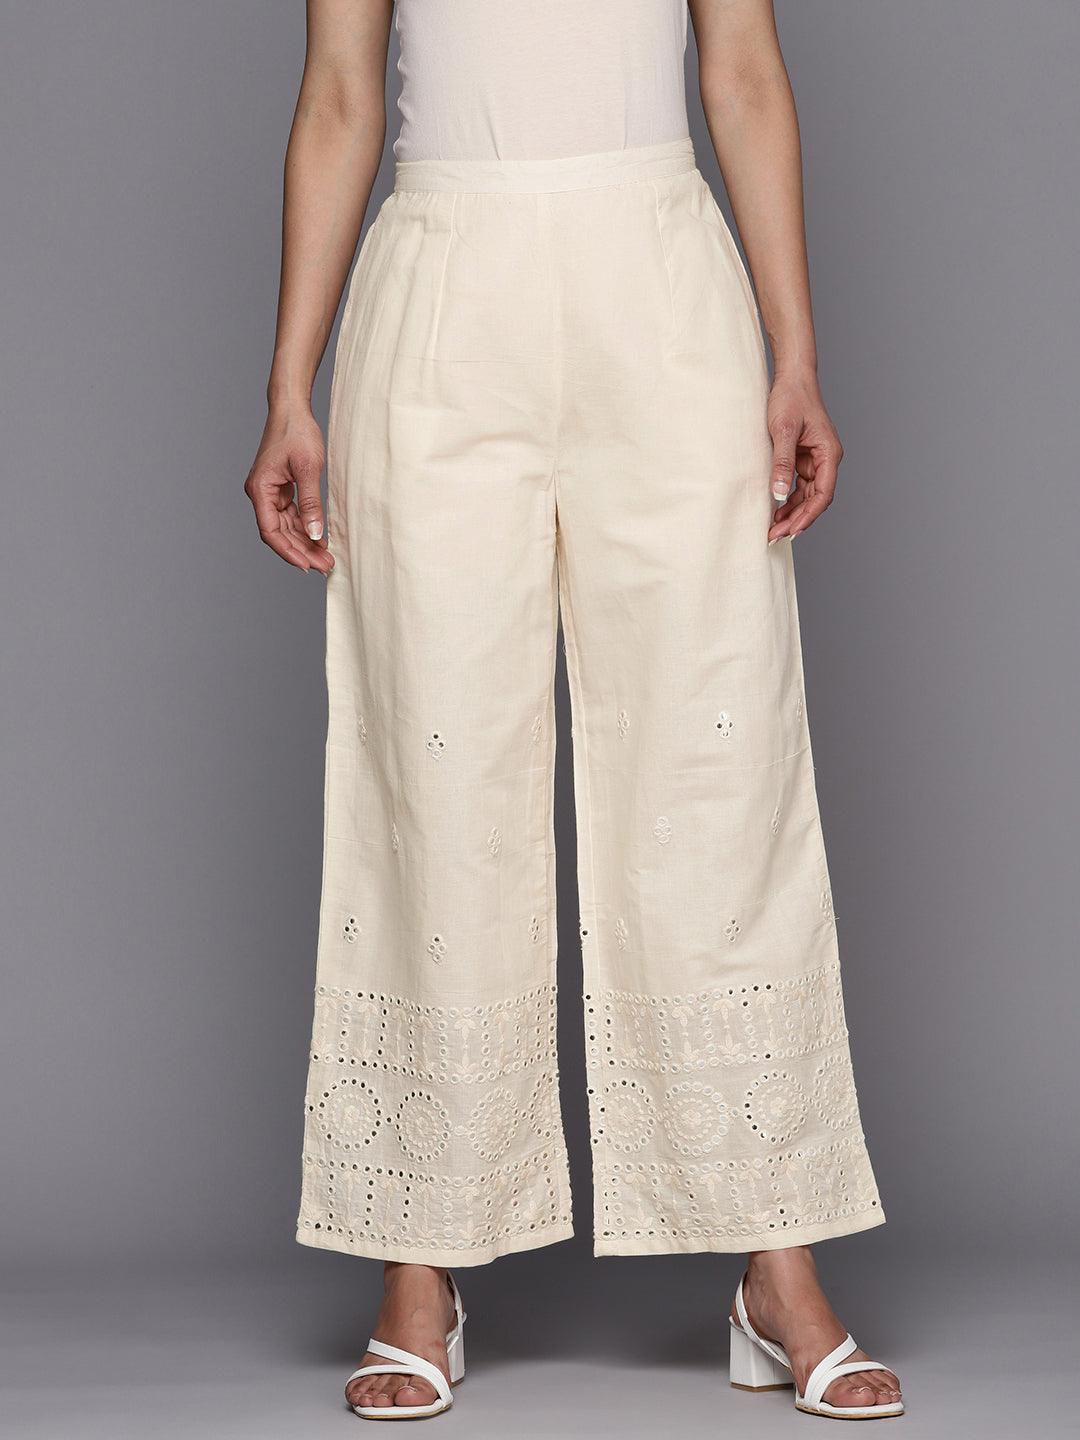 Off White Embroidered Cotton Palazzos - Libas